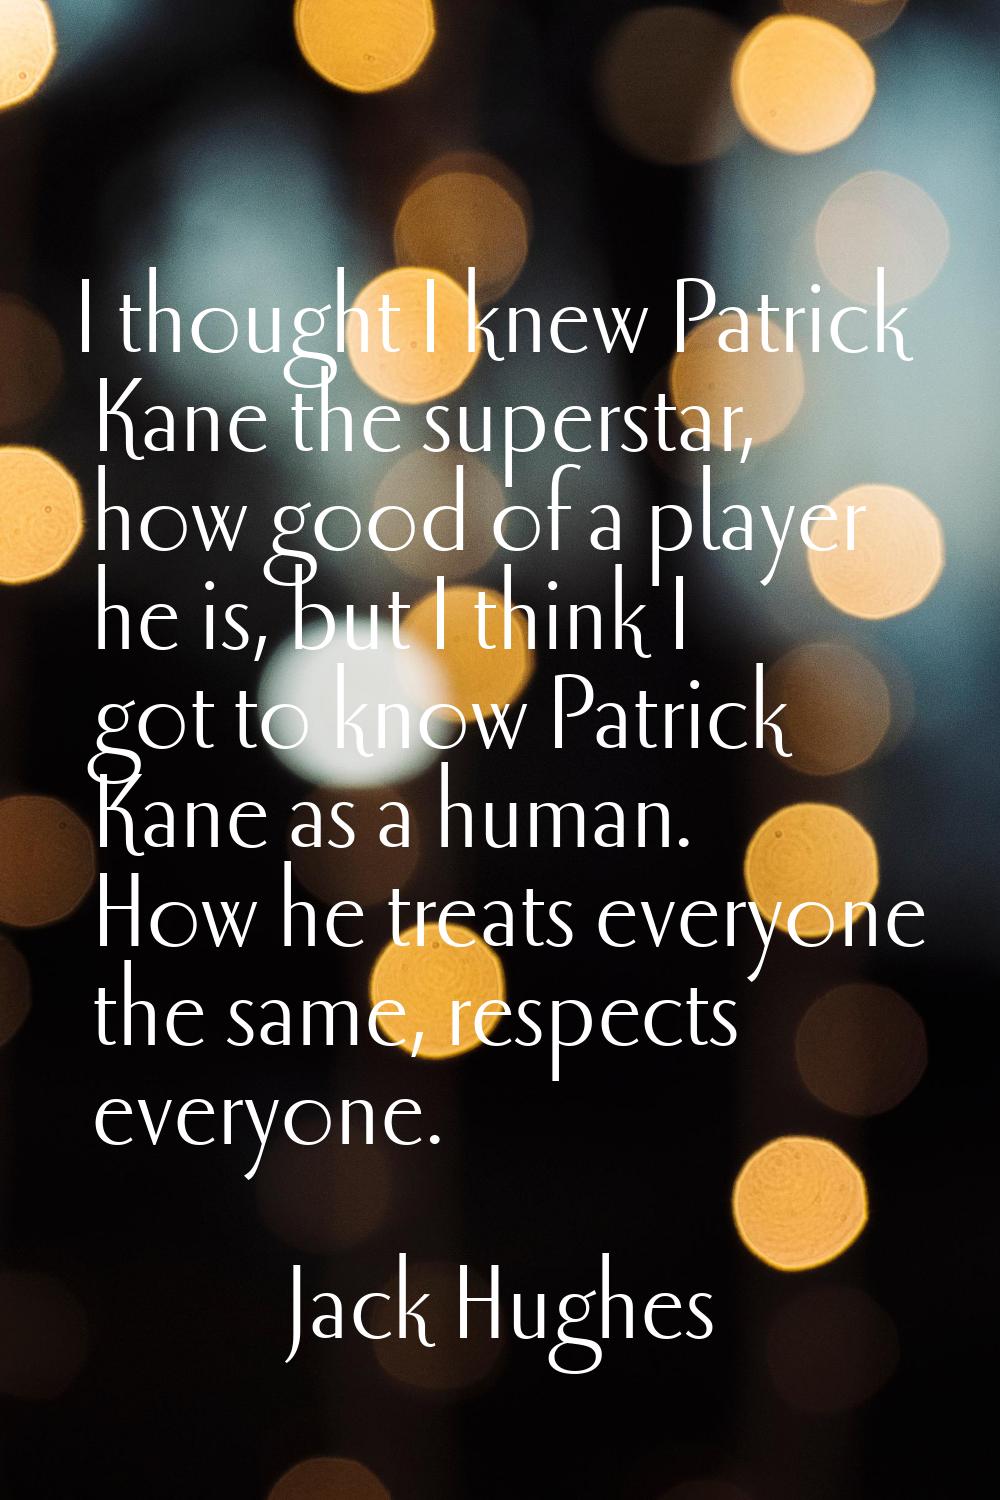 I thought I knew Patrick Kane the superstar, how good of a player he is, but I think I got to know 